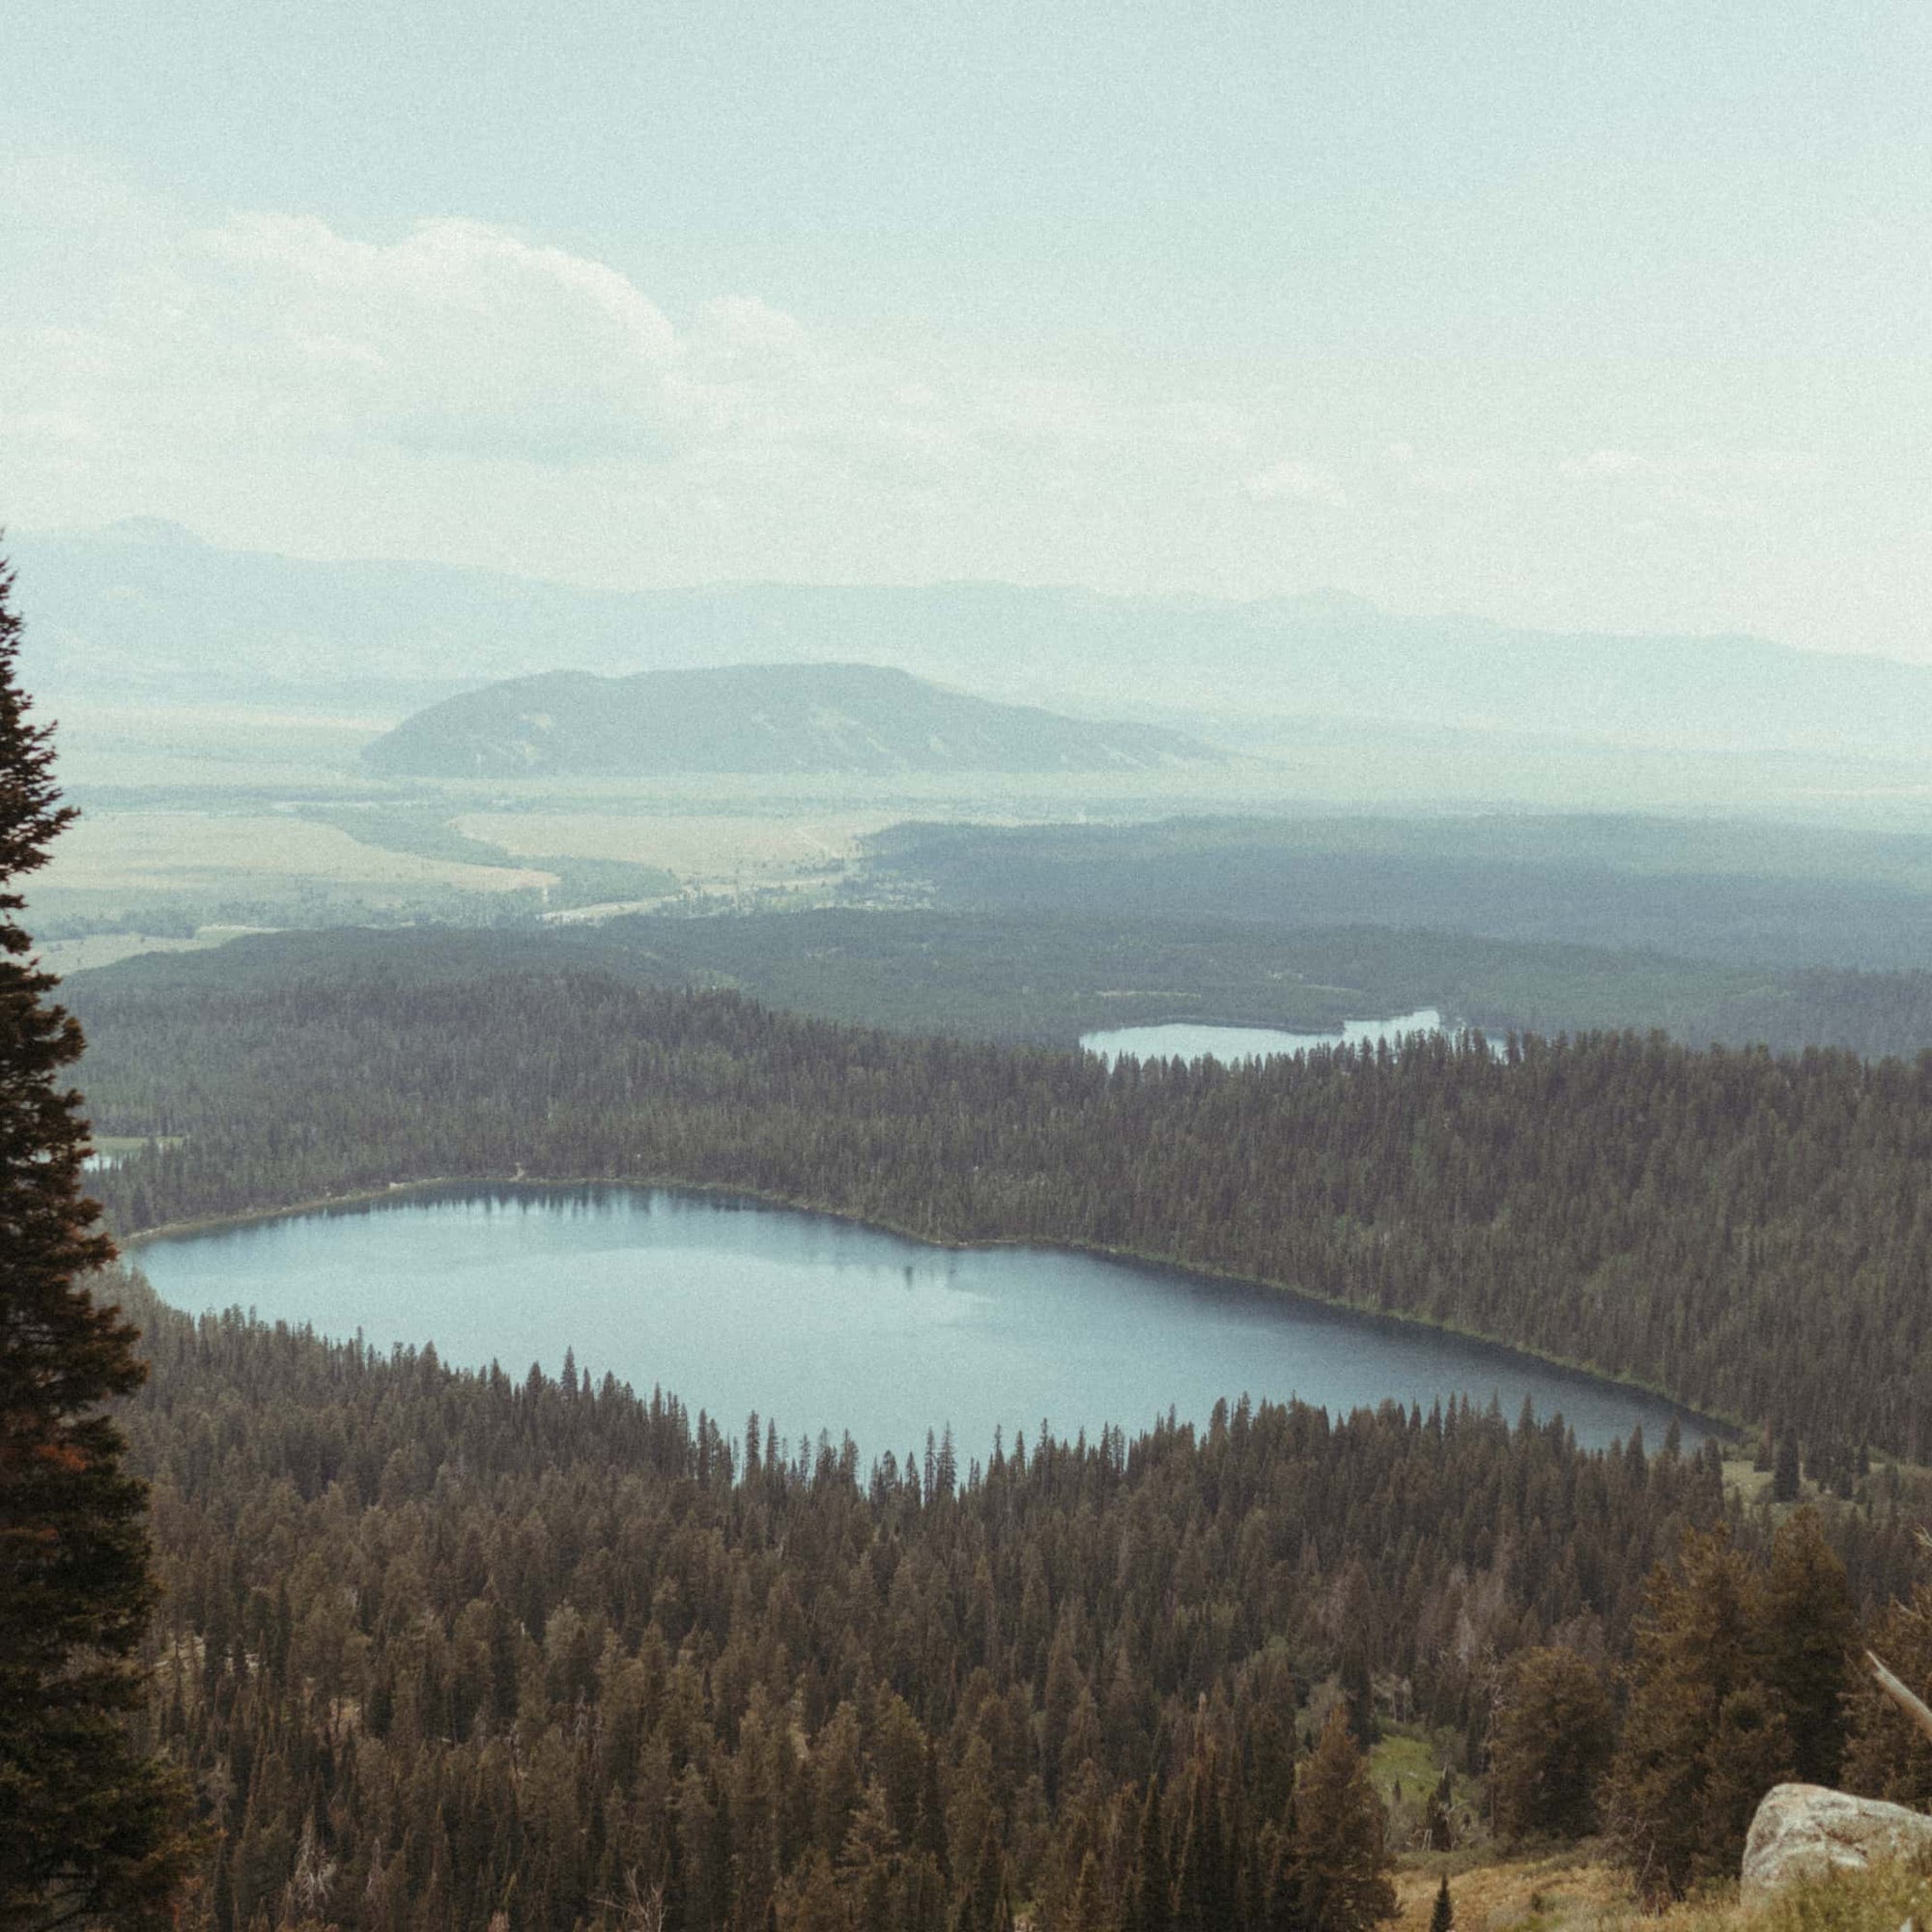 Scenic image of trees and a lake in Wyoming